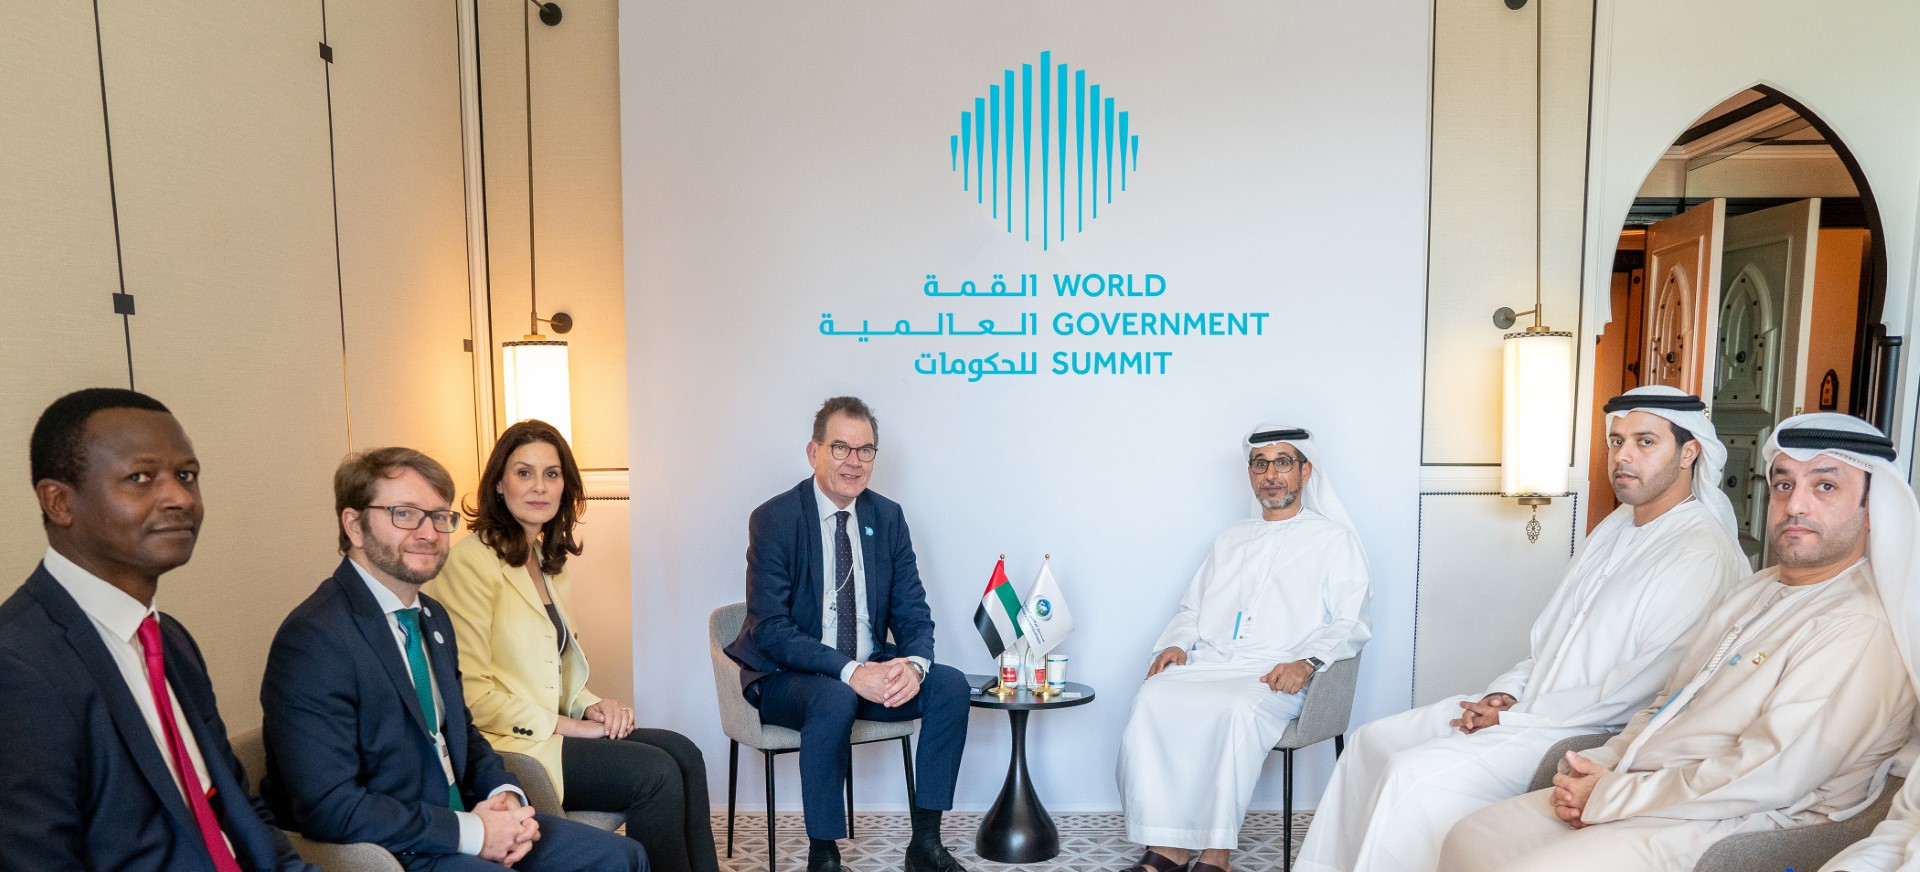 ADFD, UNIDO discuss joint efforts to drive sustainable development